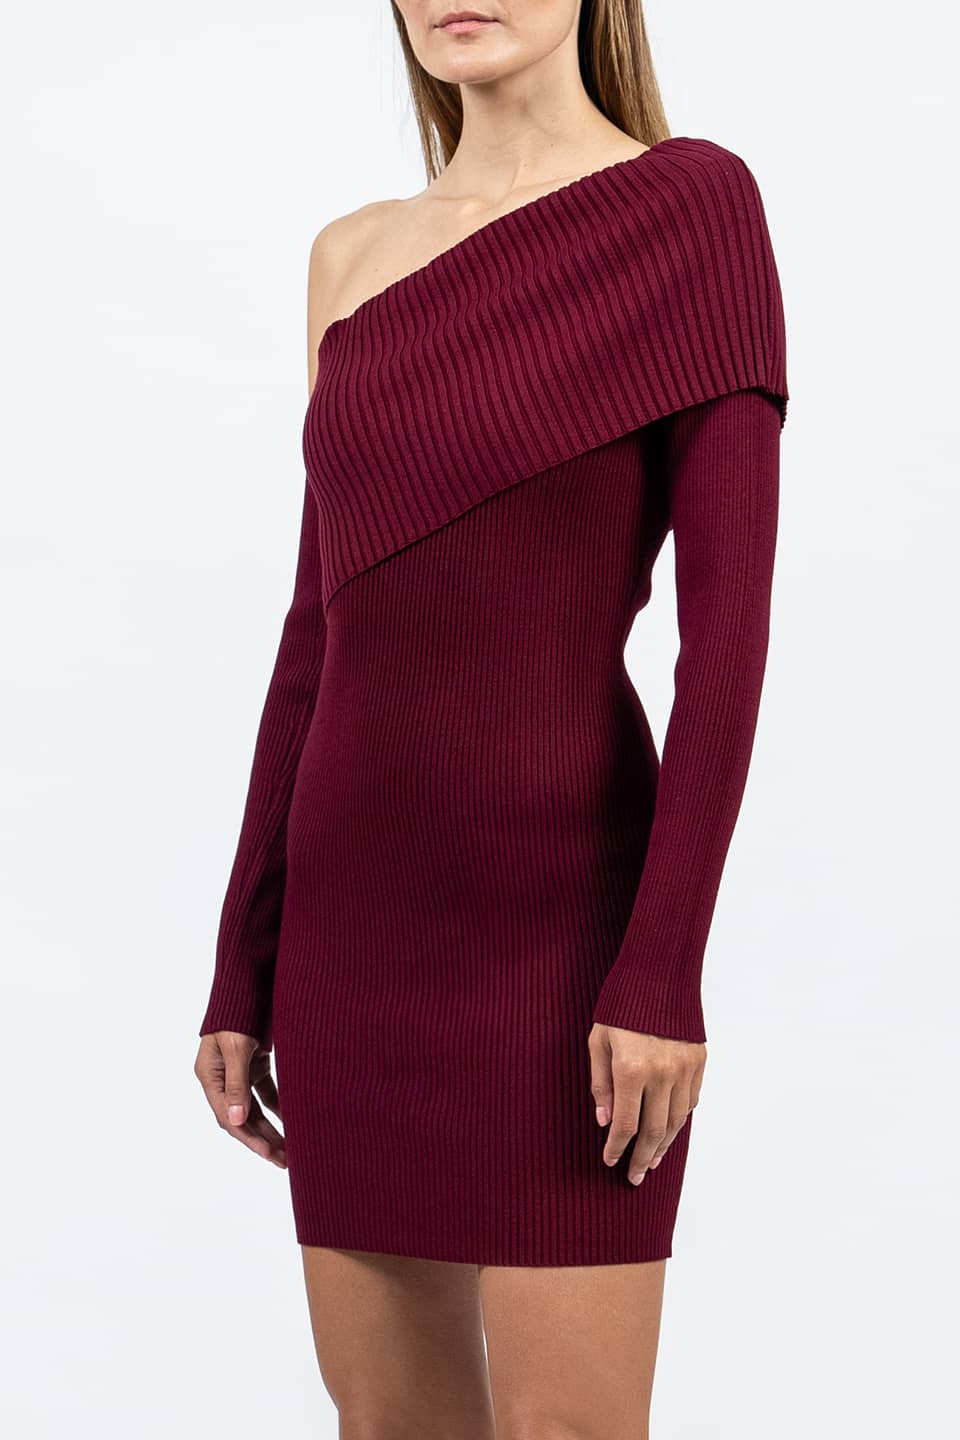 Thumbnail for Product gallery 5, Burgundy One Sided Knit Dress